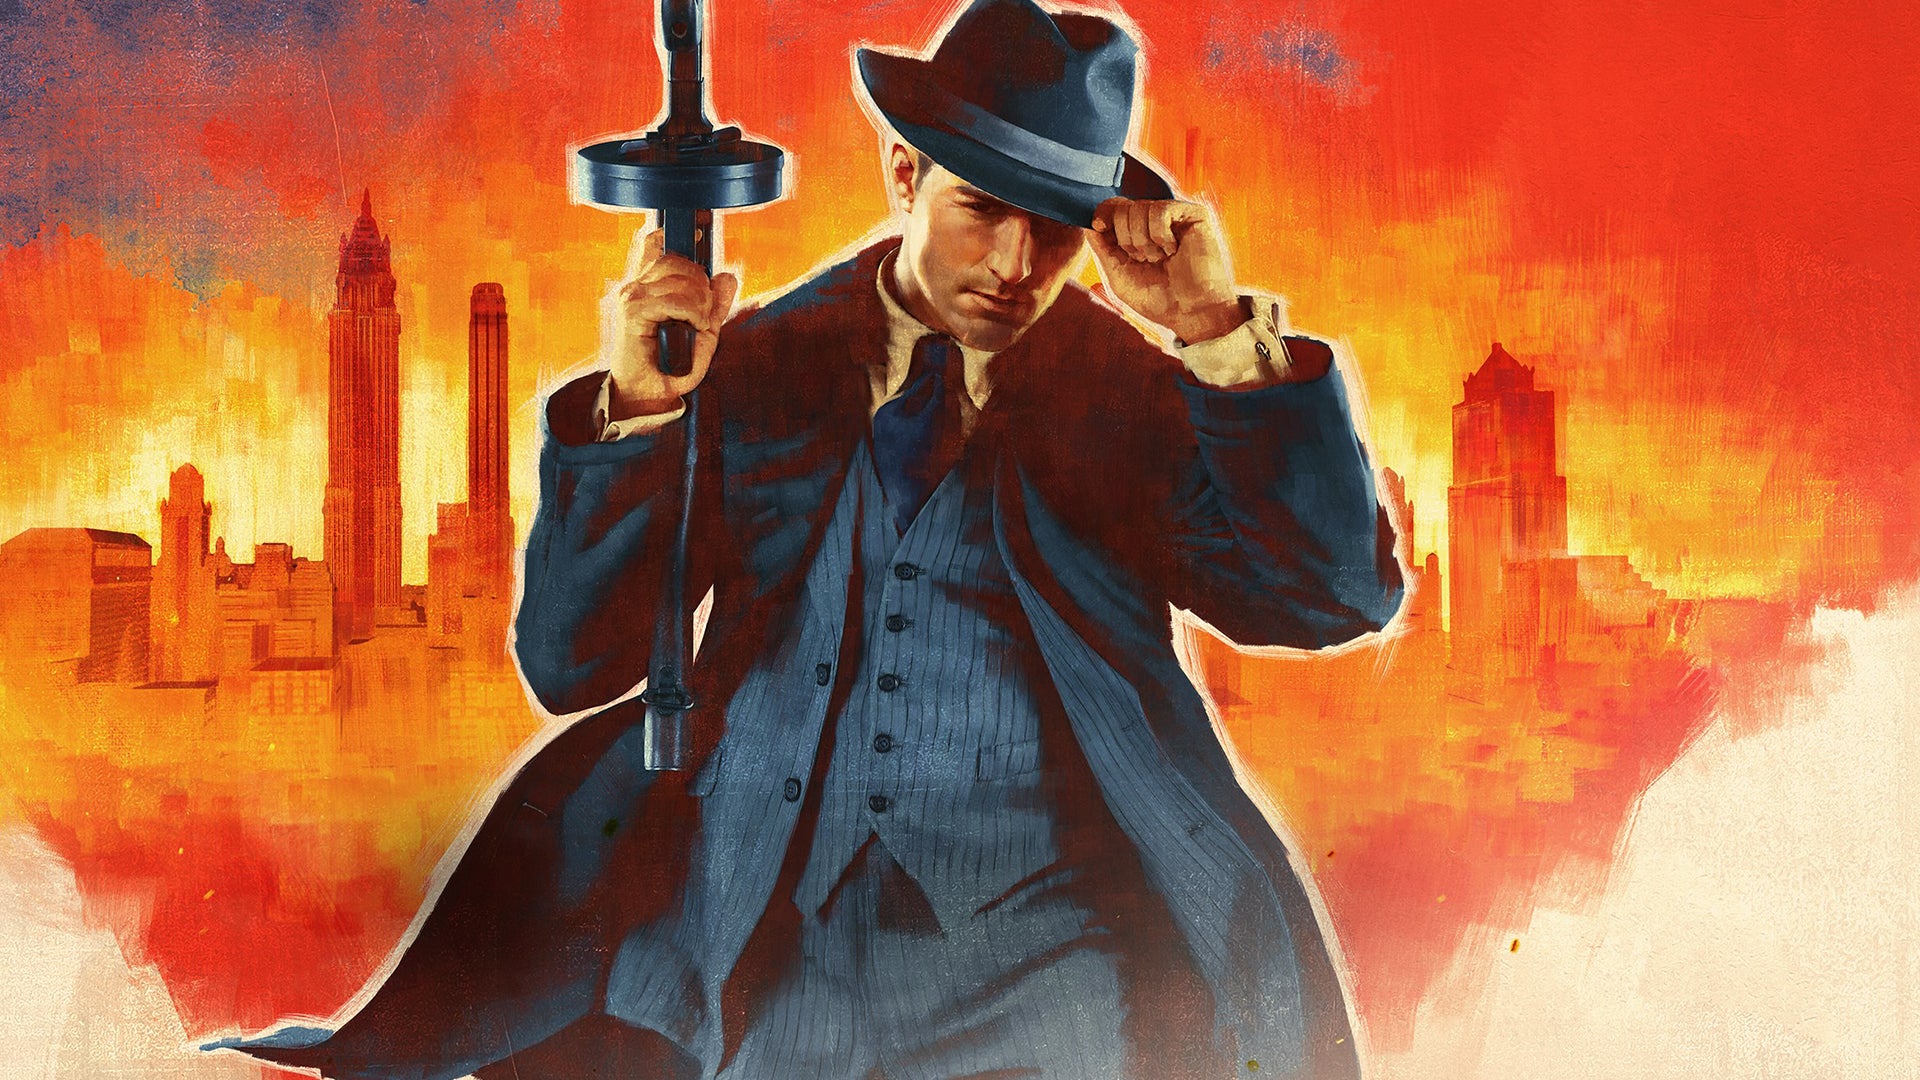 Image for Mafia Definitive Edition: A Stunning Remake Showcased At 4K - PC Early Hands-on